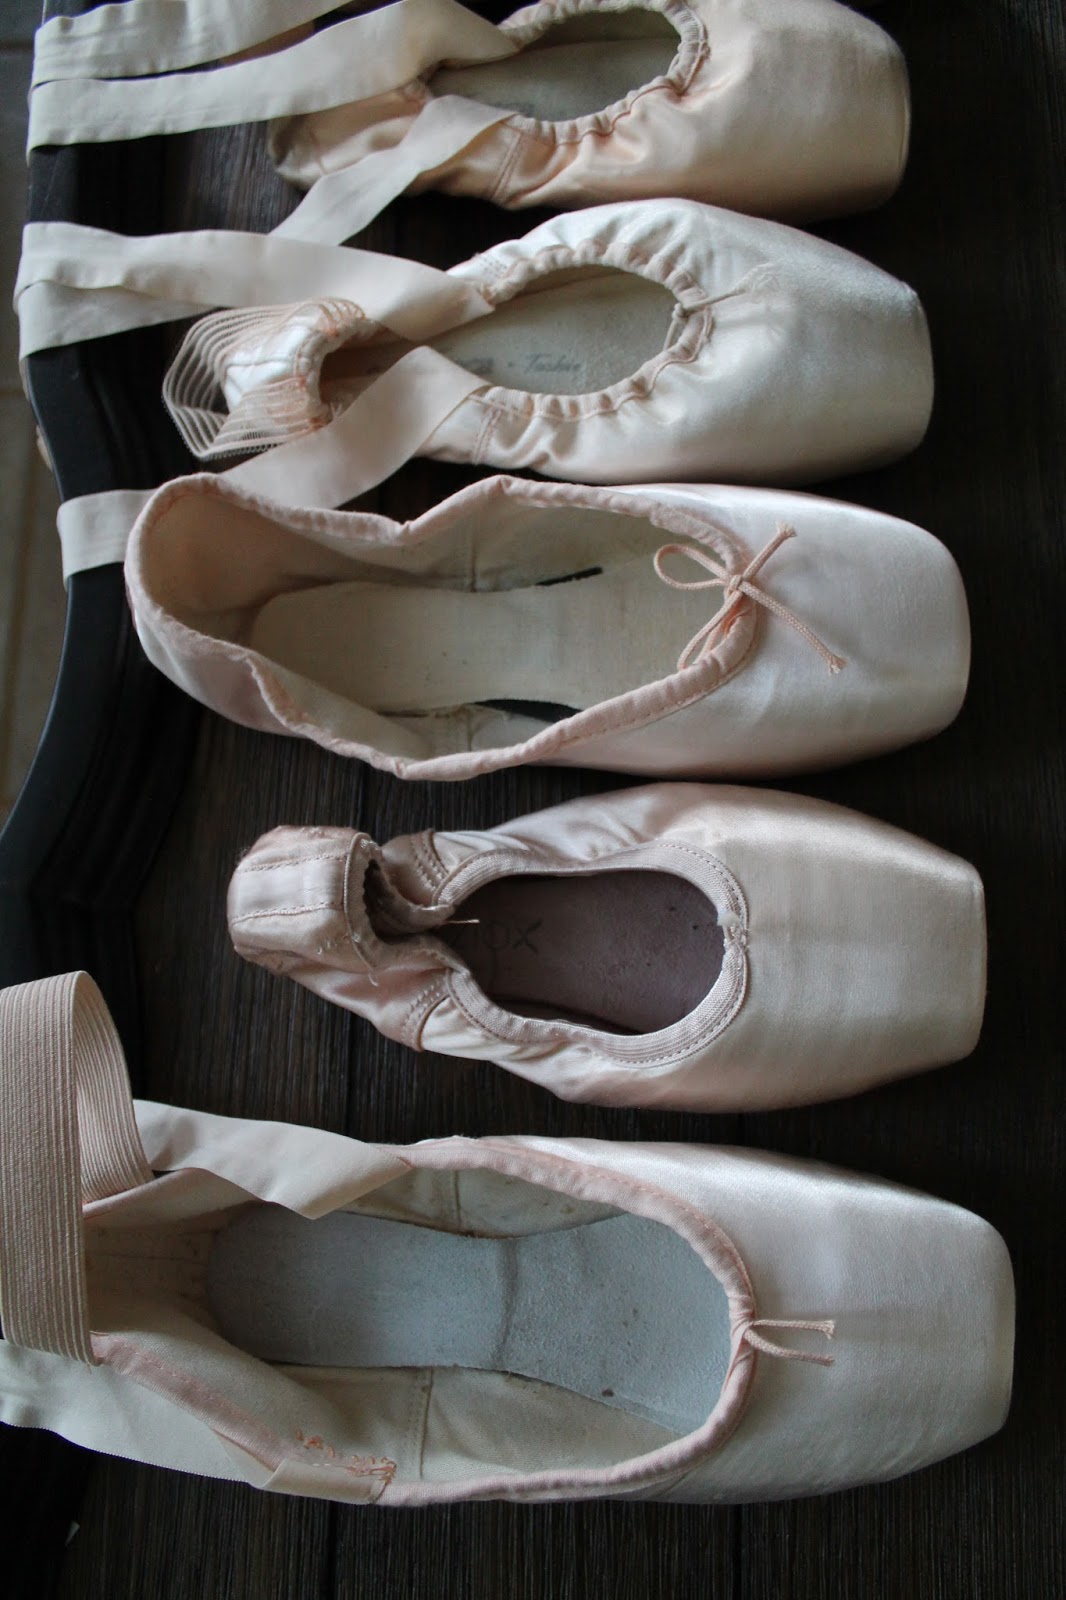 Pointe shoe fitting story